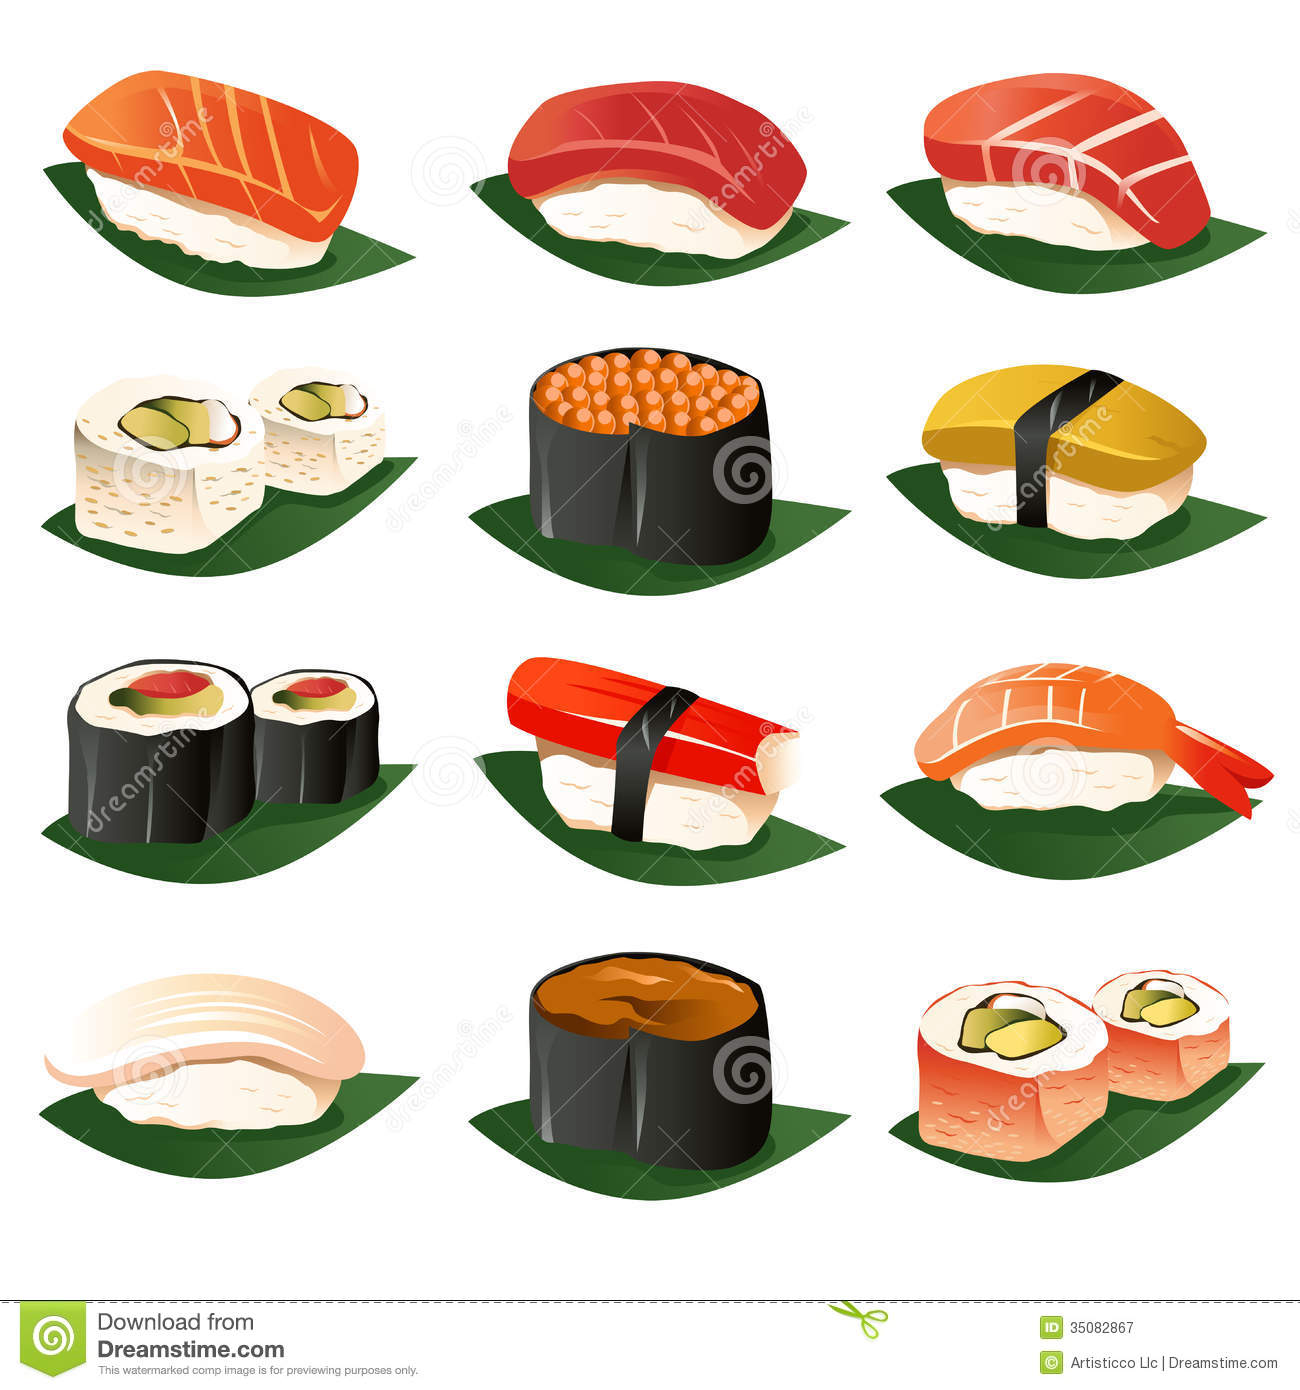 Sushi icons | Noun Project